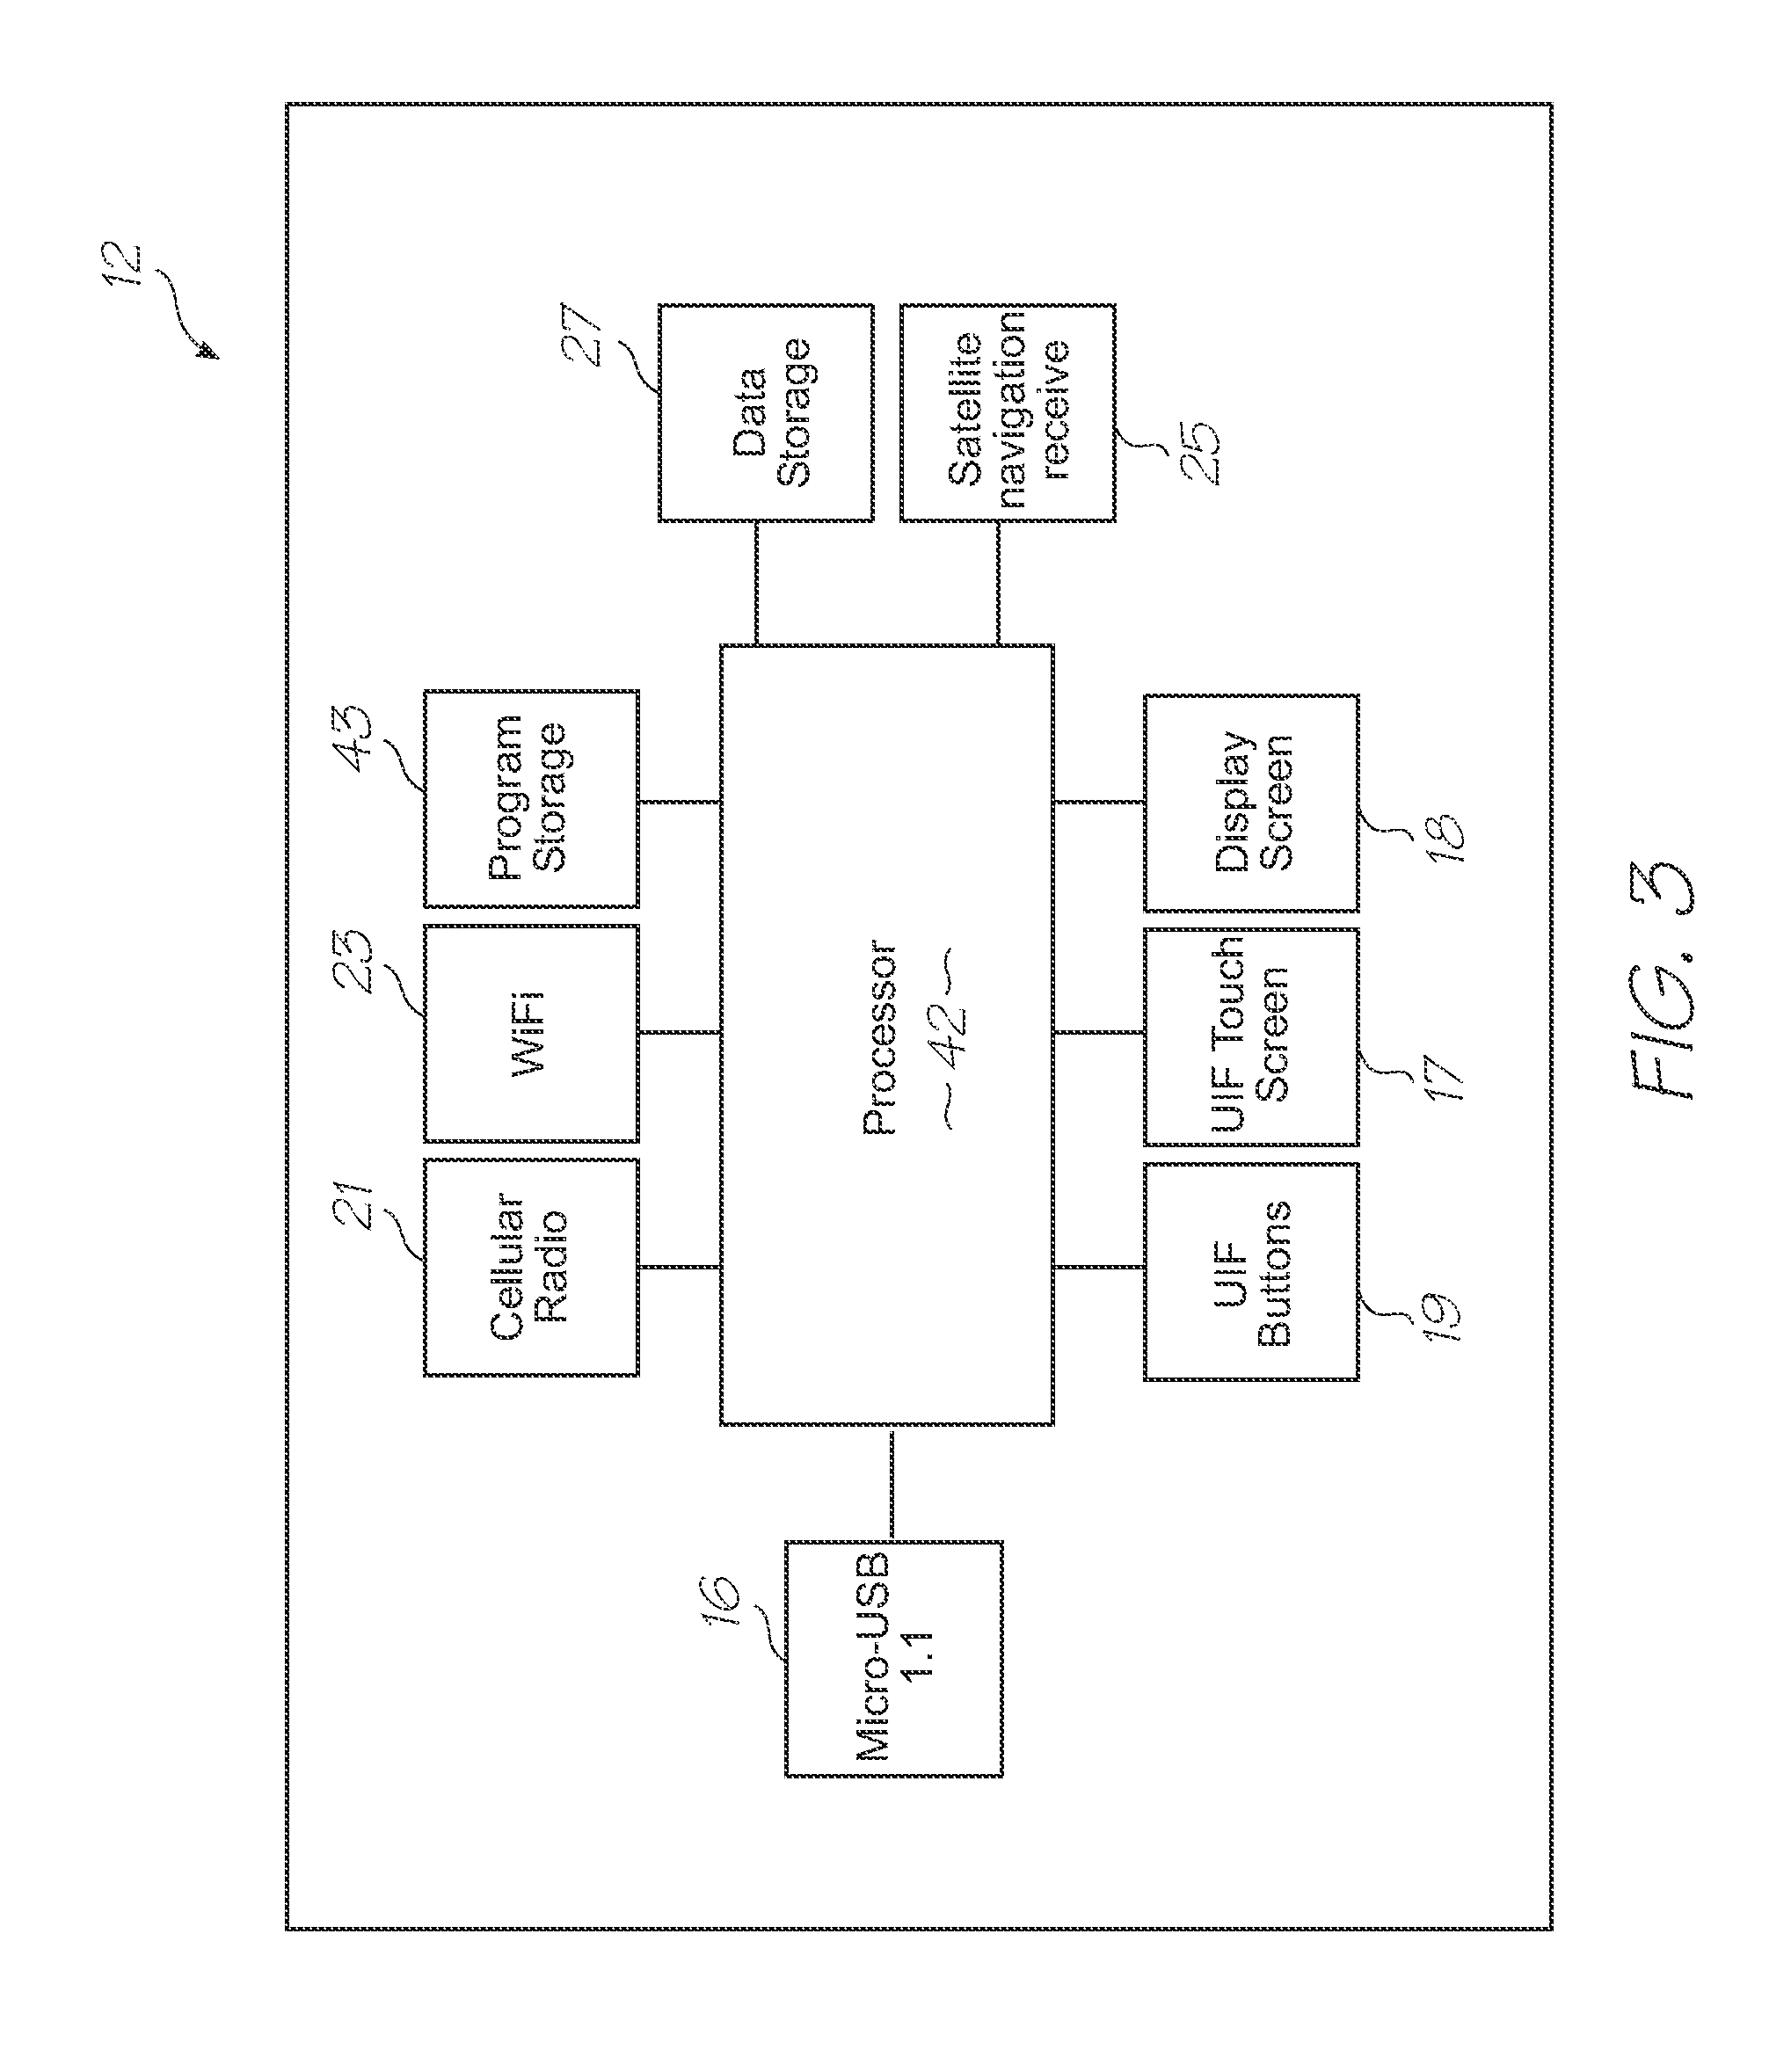 Loc device with parallel incubation and parallel nucleic acid amplification functionality